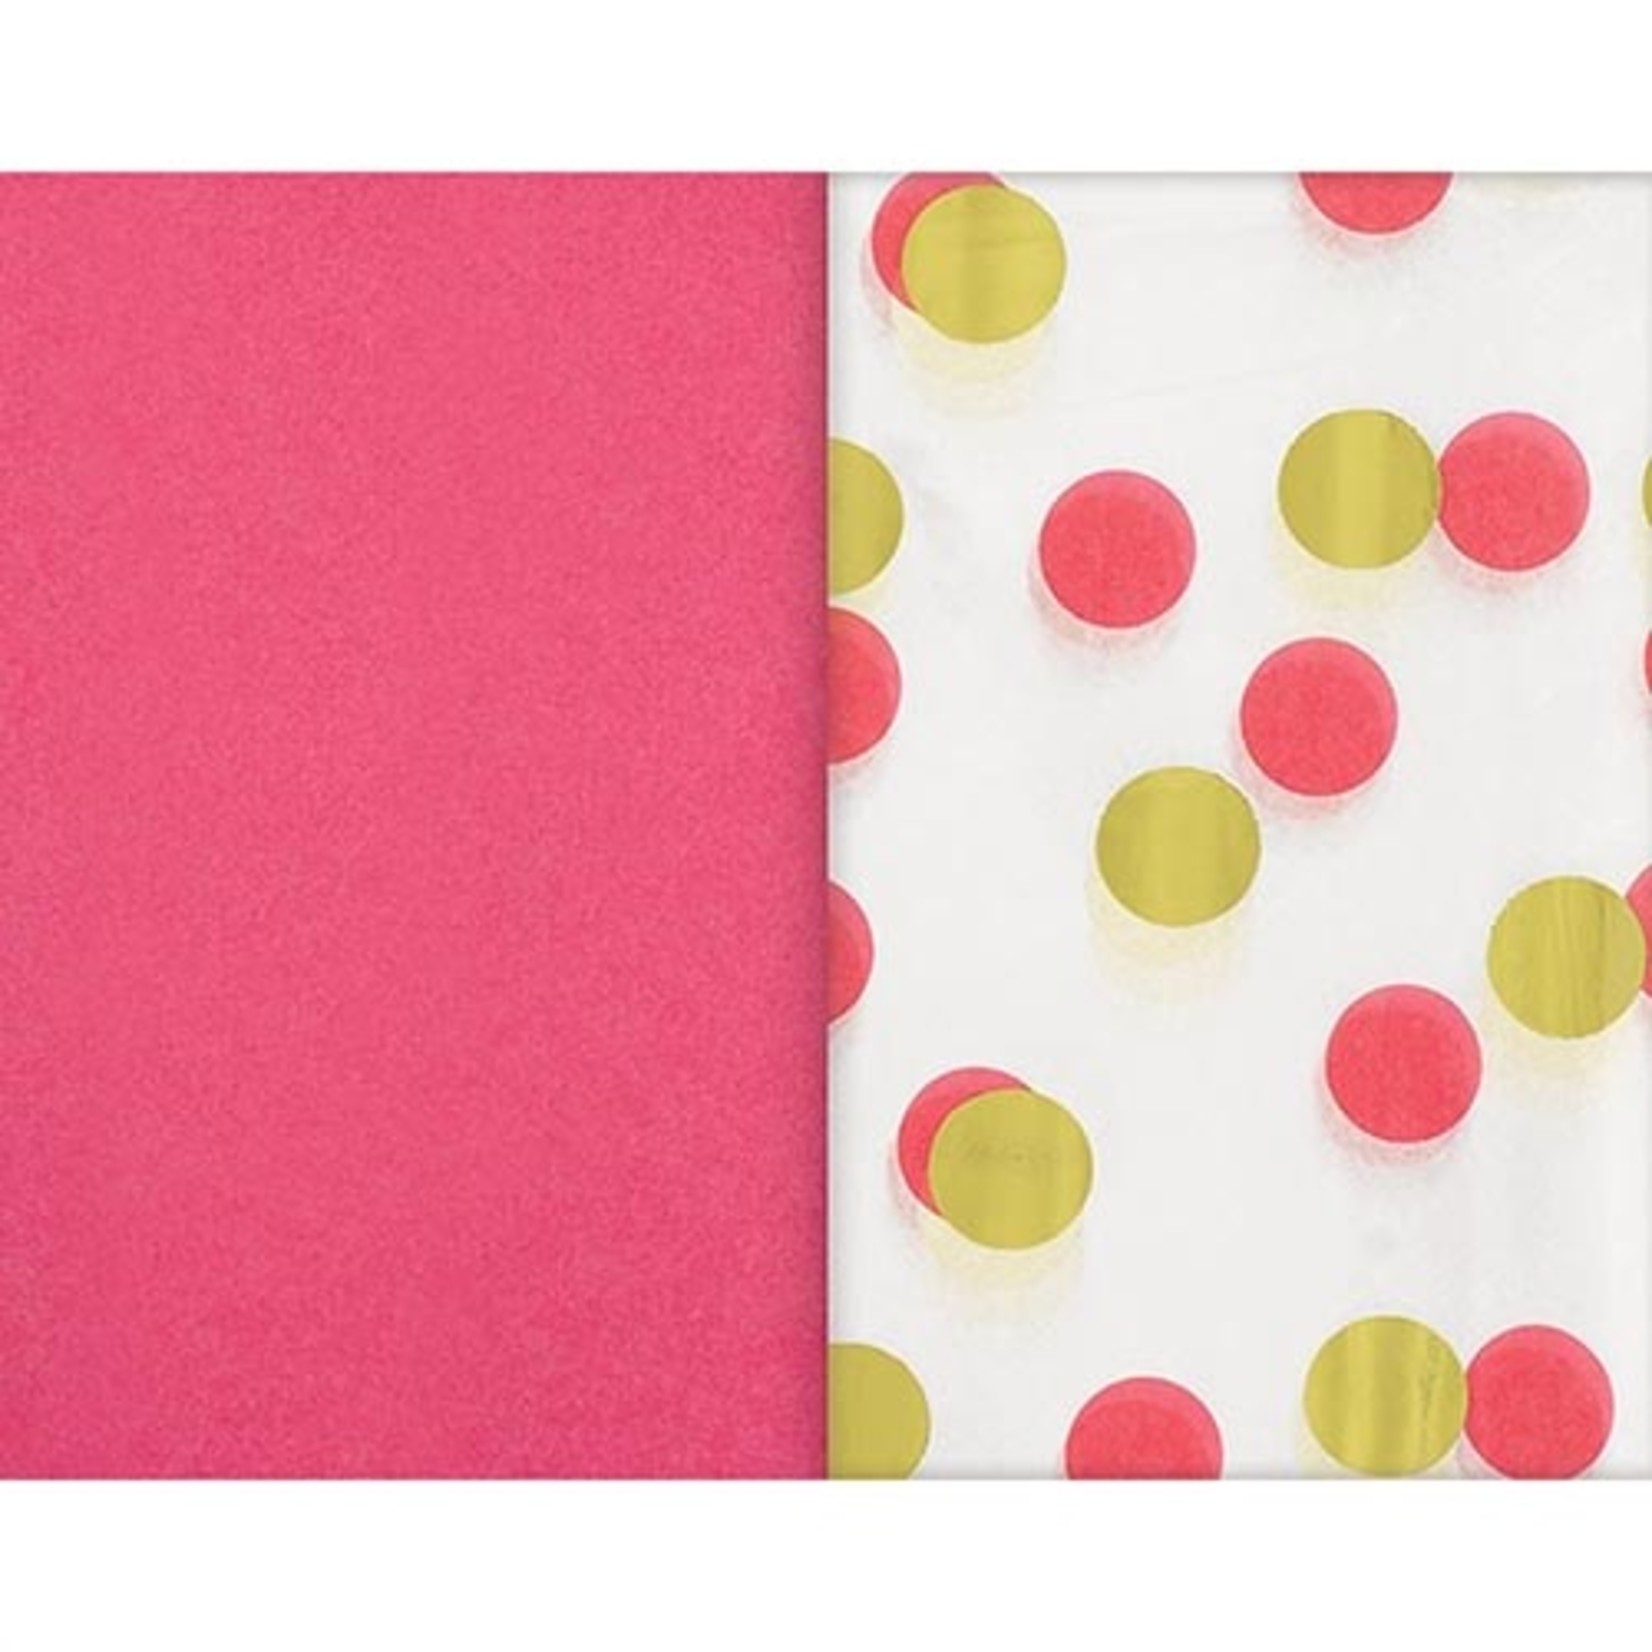 Amscan Pink & Gold Foil Dots Tissue Paper - 8ct. (20" x 20")